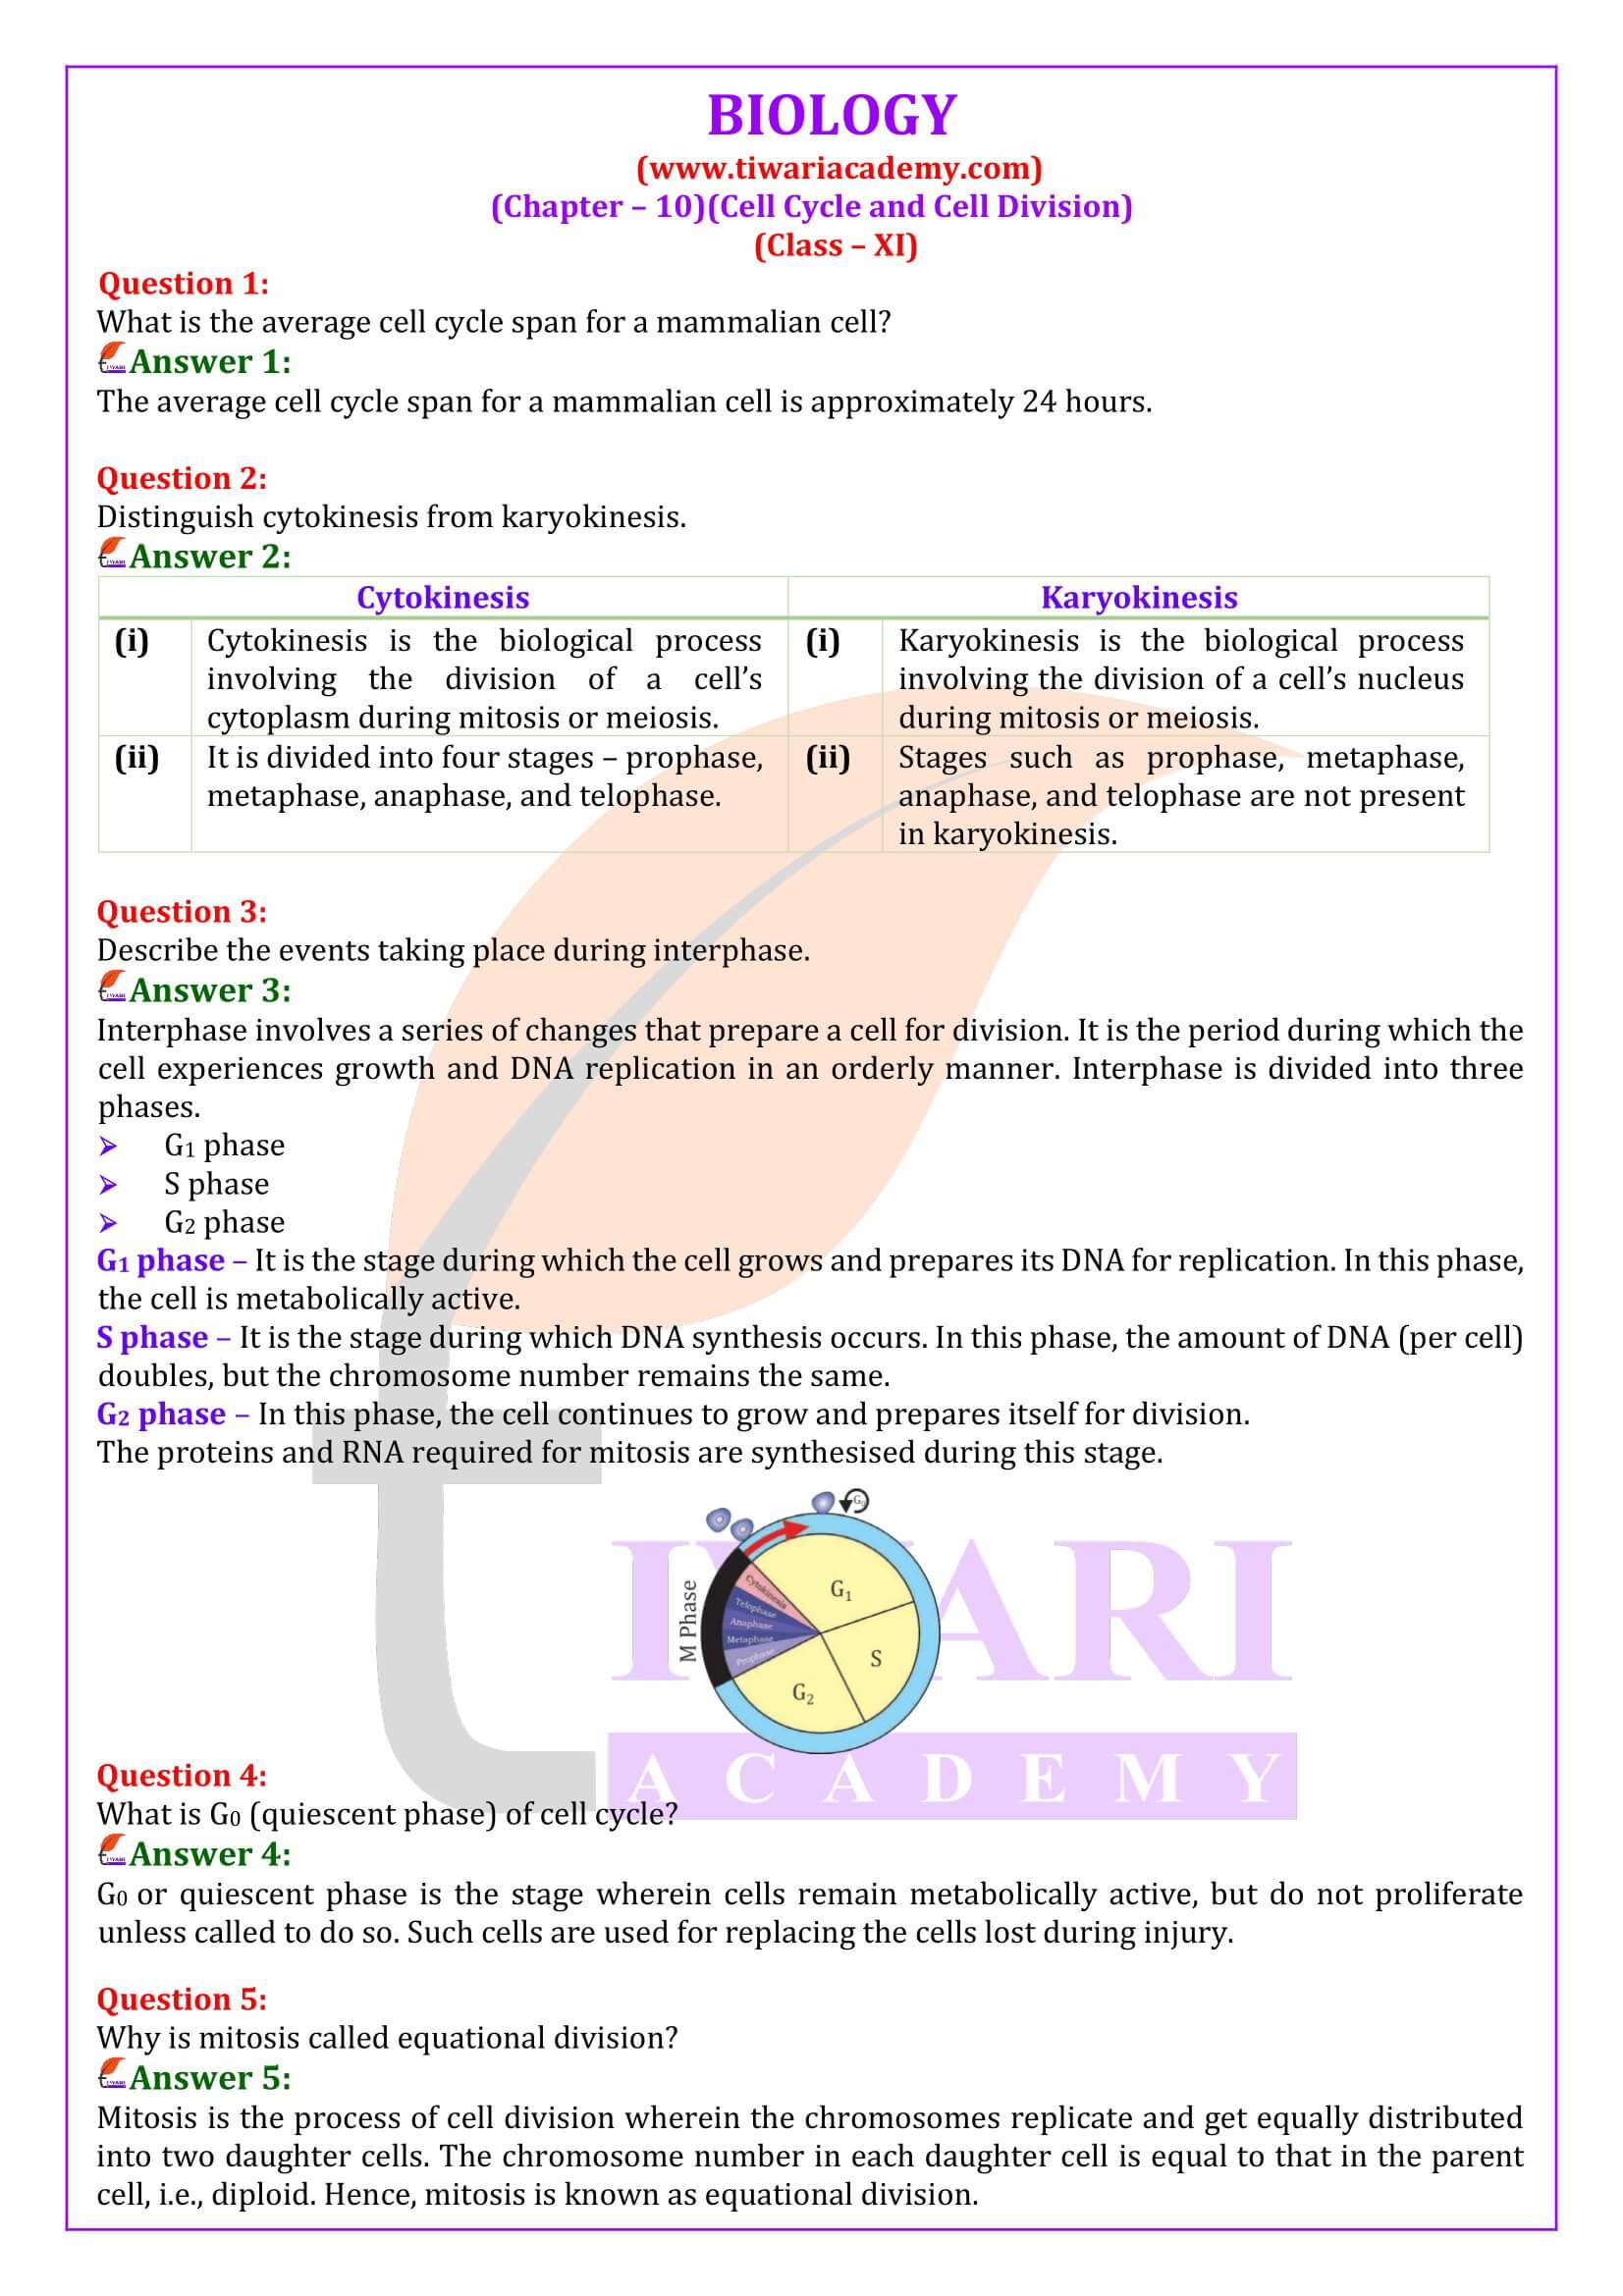 NCERT Solutions for Class 11 Biology Chapter 10 in English Medium